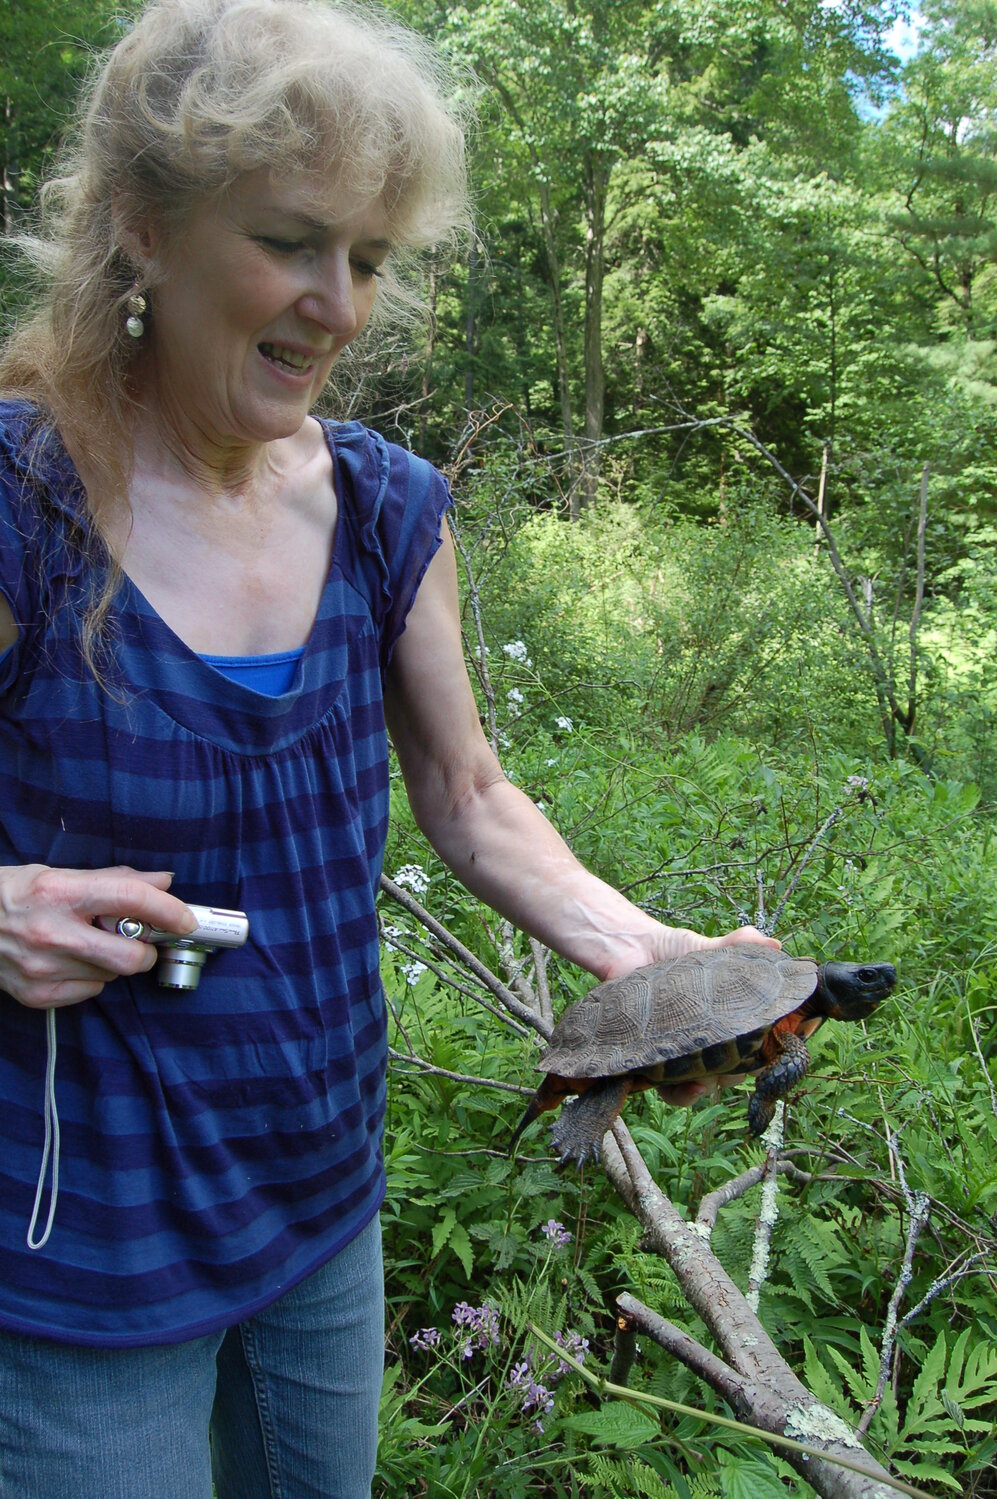 Wildlife rehabilitator Kathy Michell holds one of her study turtles during a walk we took in 2010. Wood turtles have a strong affinity for a home region of roughly 1/4 mile on either side of a favored stream, which makes them easy targets for poachers and highlights the importance of protecting such critical habitat for this threatened species...